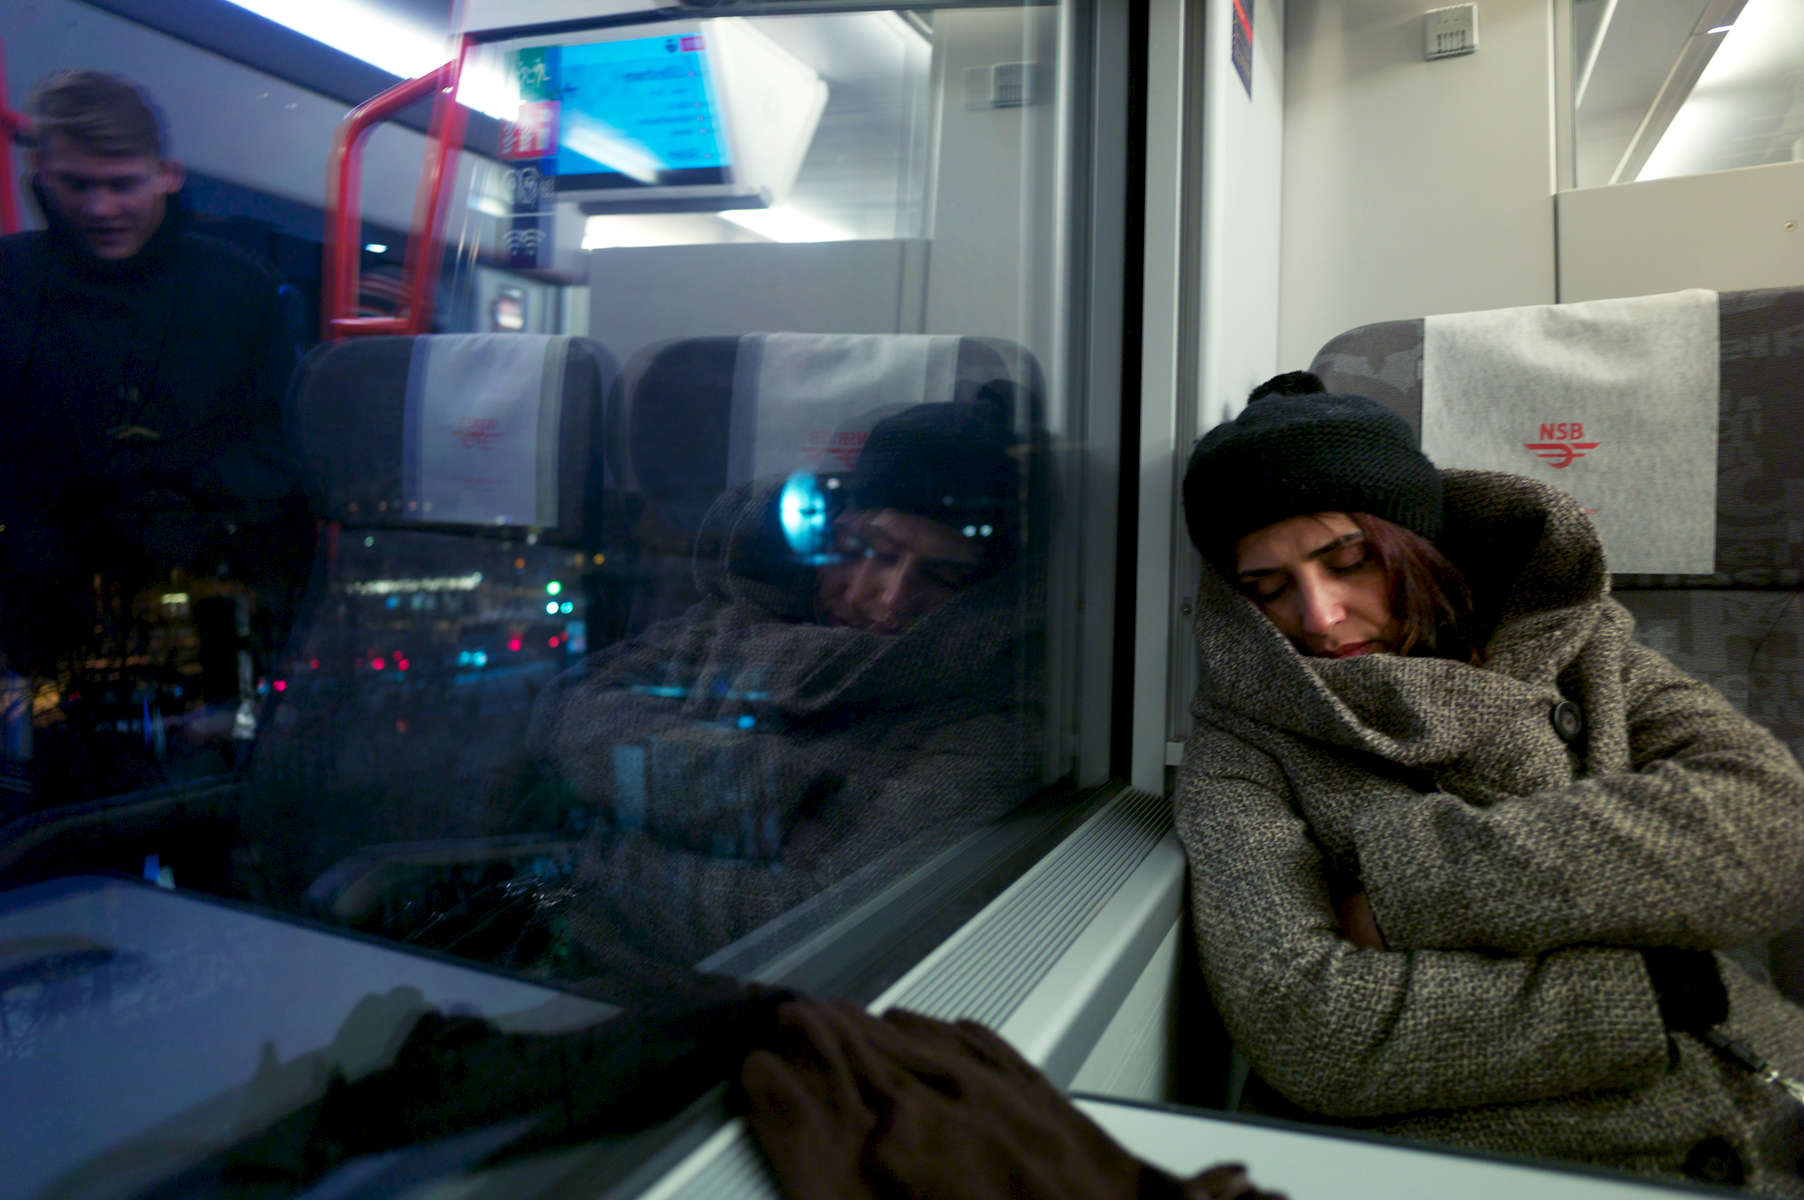 A rejected asylum seeker sleeps on a train as a fellow passenger (who is reflected in the window) approaches her seat.